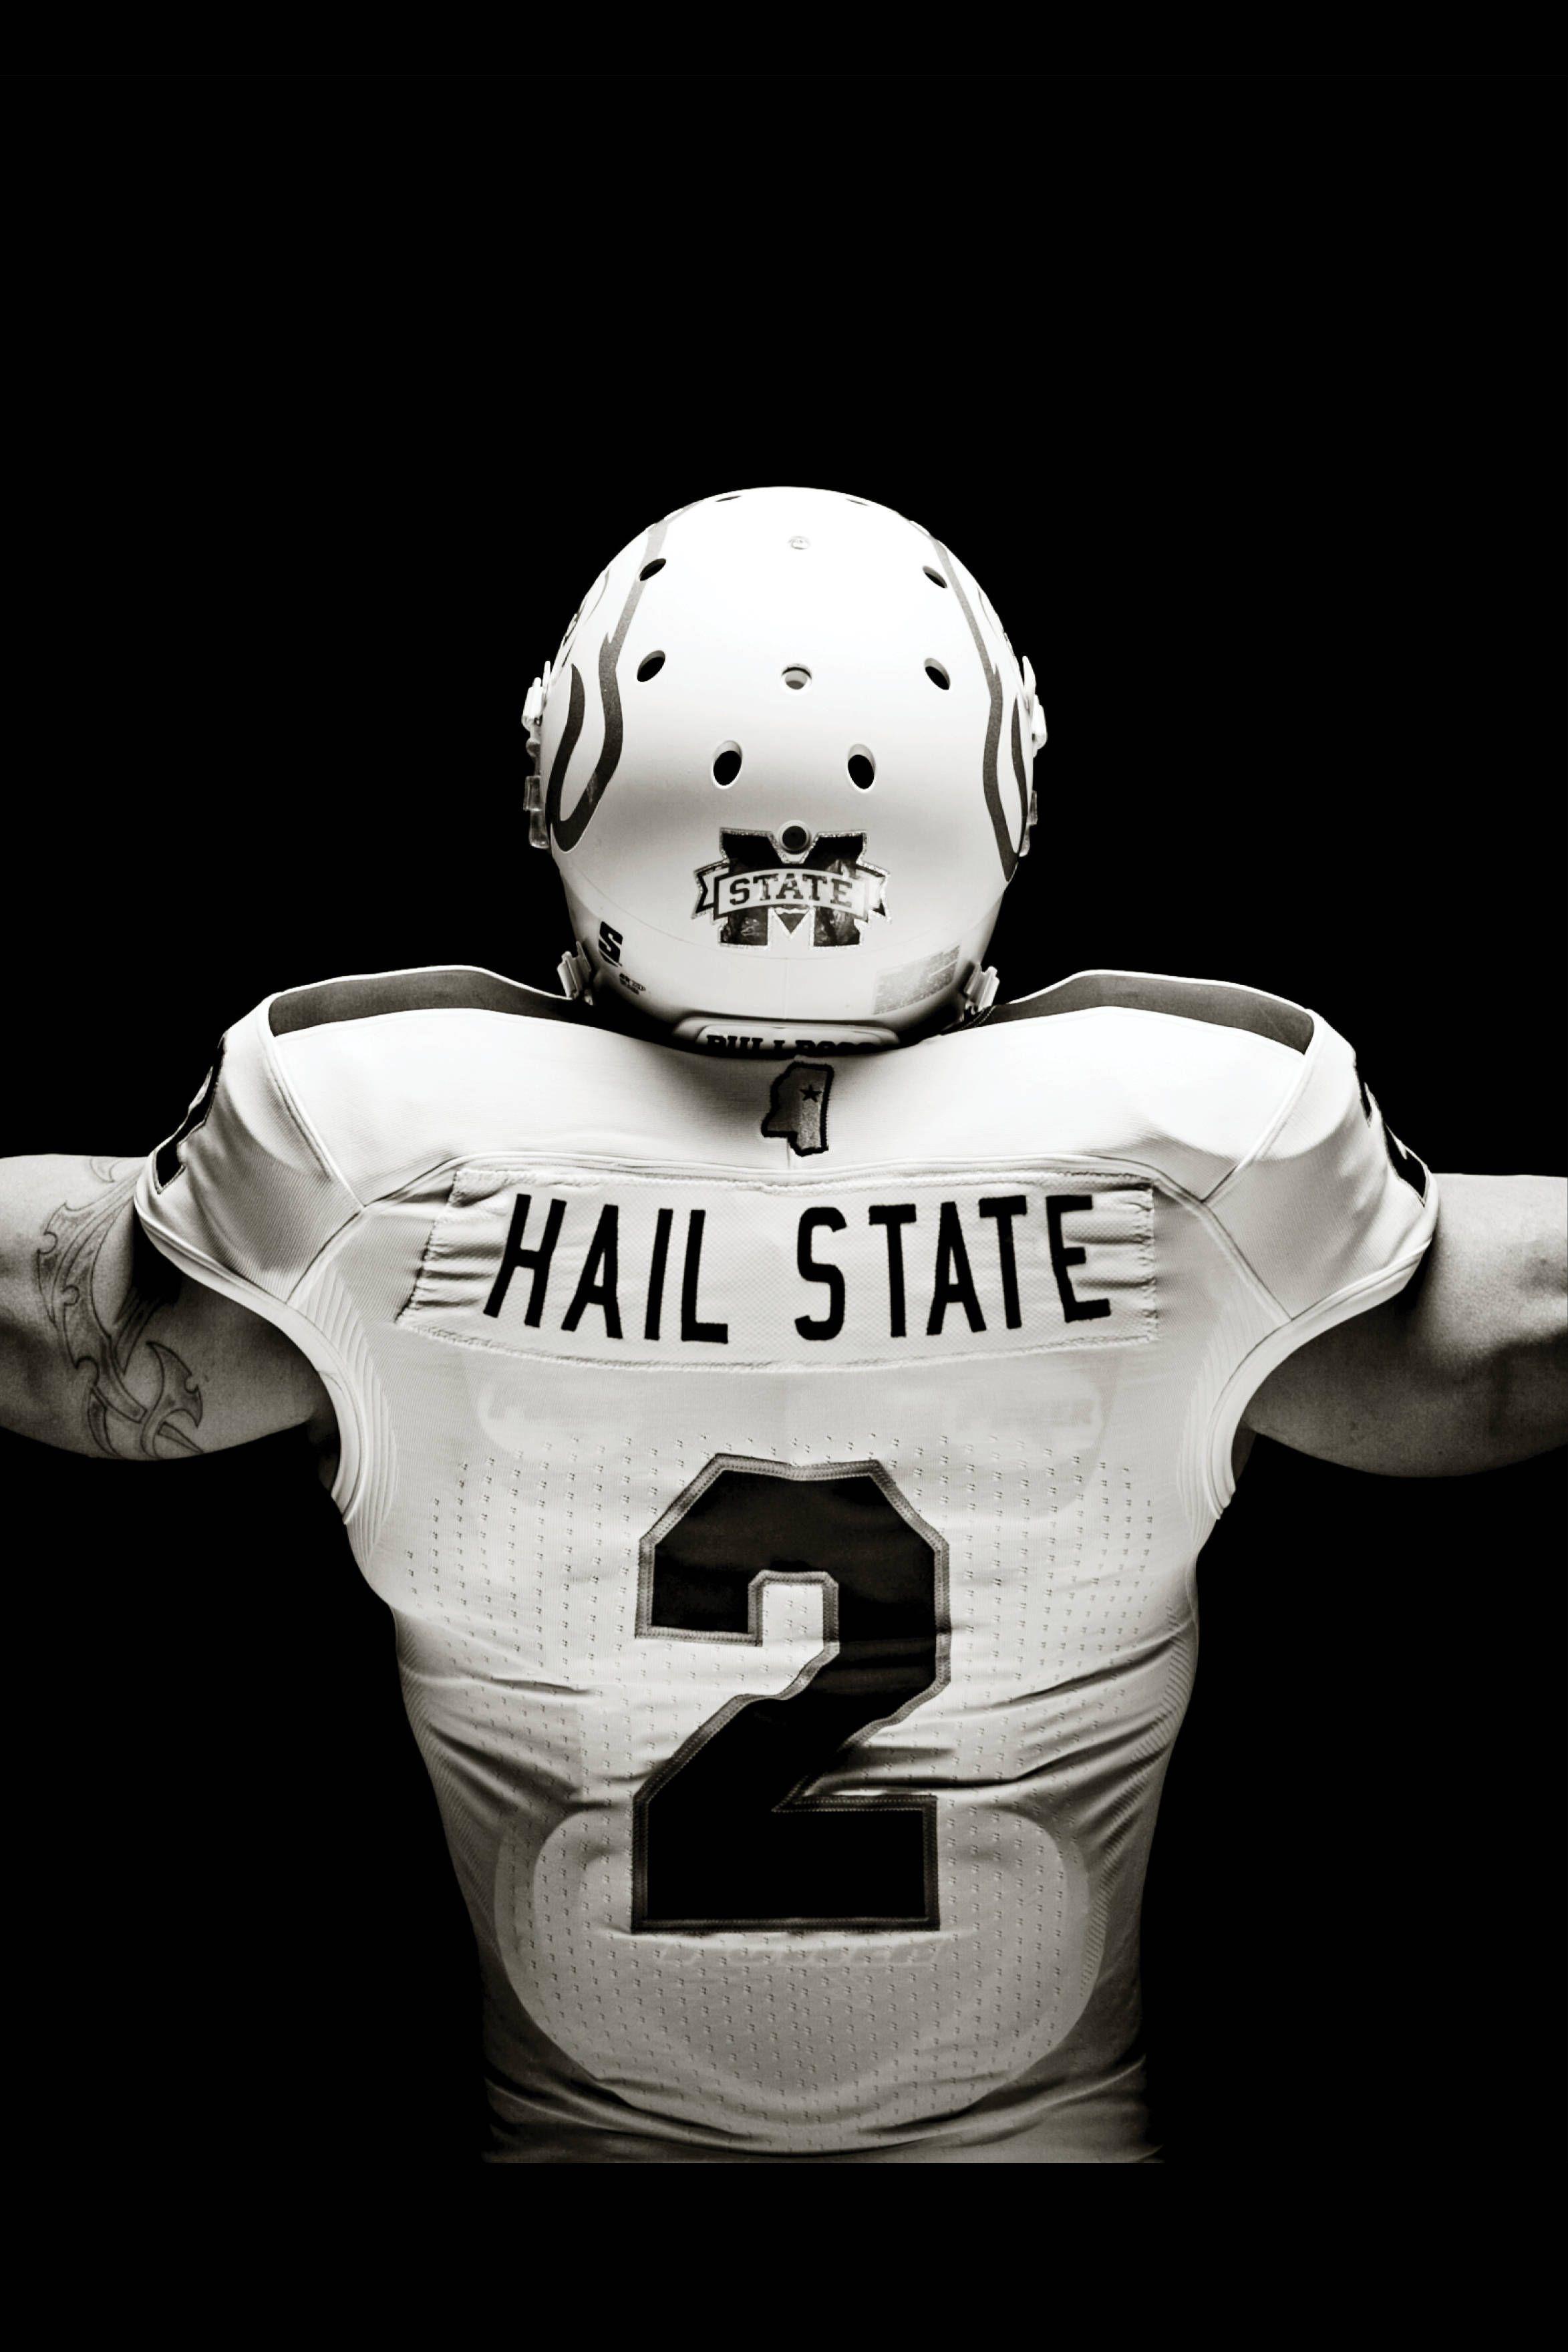 Hail State IPhone wallpaper. Mississippi State